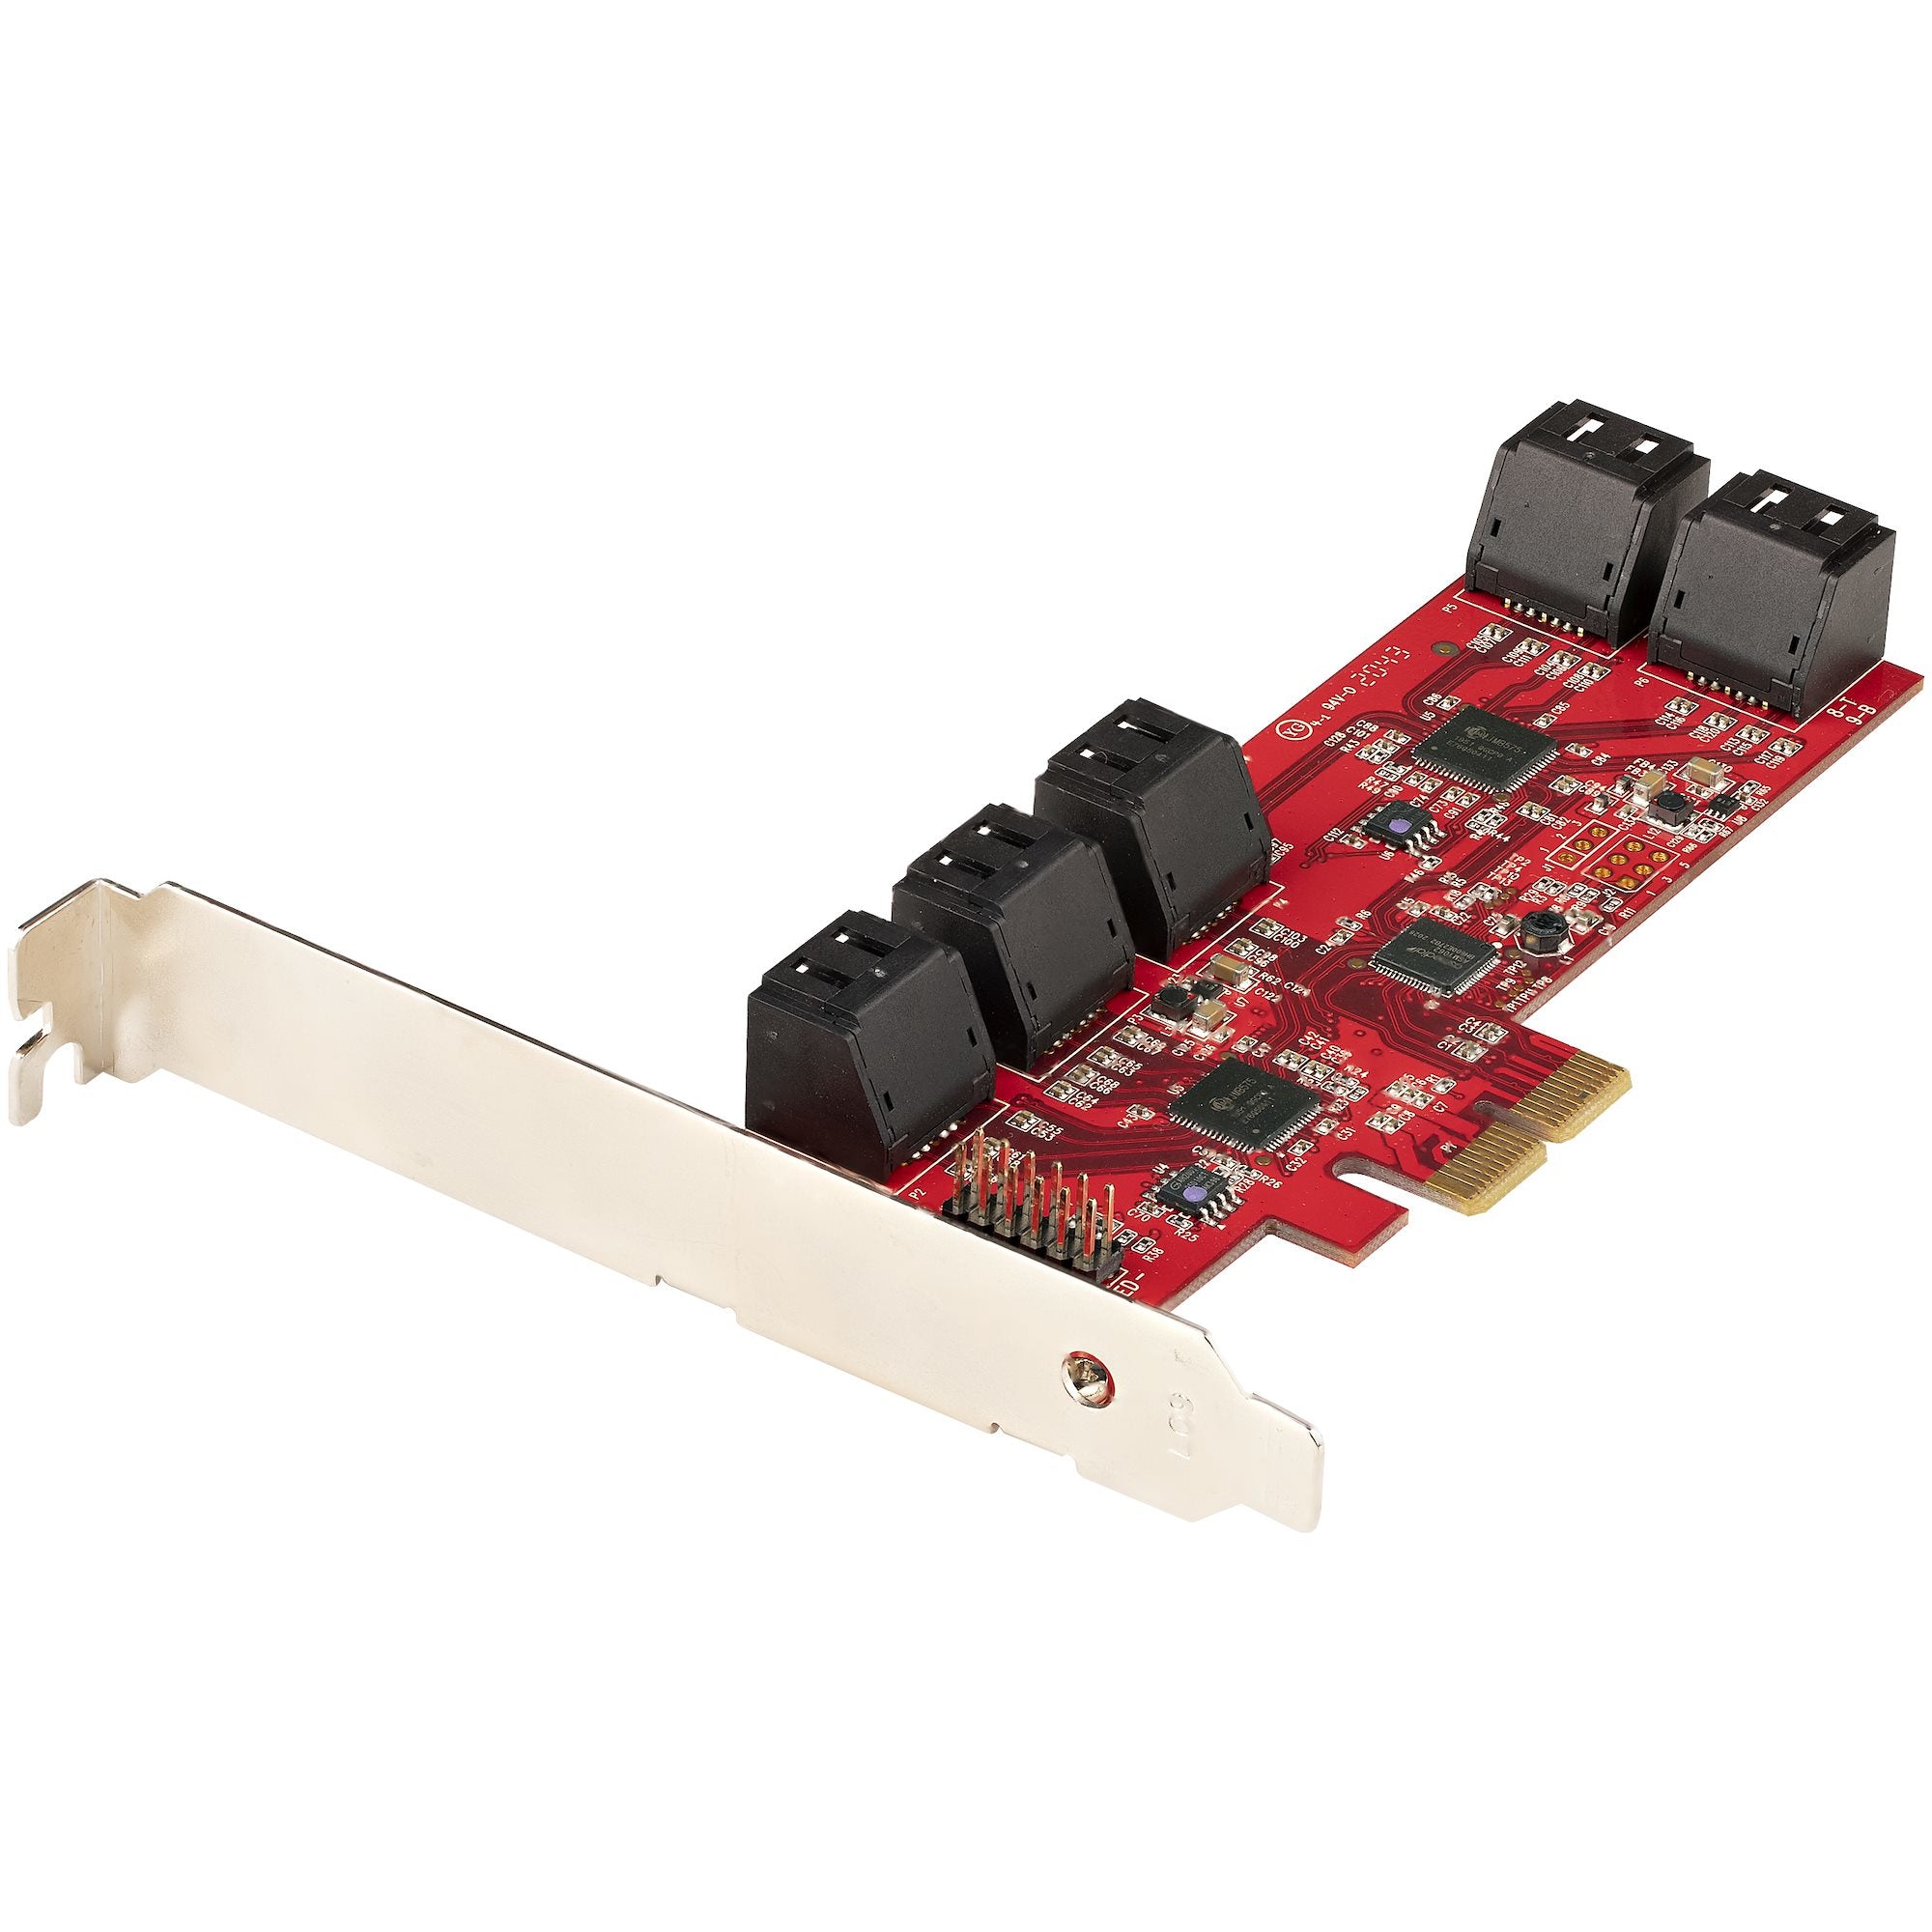 StarTech.com SATA PCIe Card - 10 Port PCIe SATA Expansion Card - 6Gbps - Low/Full Profile - Stacked SATA Connectors - ASM1062 Non-Raid - PCI Express to SATA Converter/Adapter